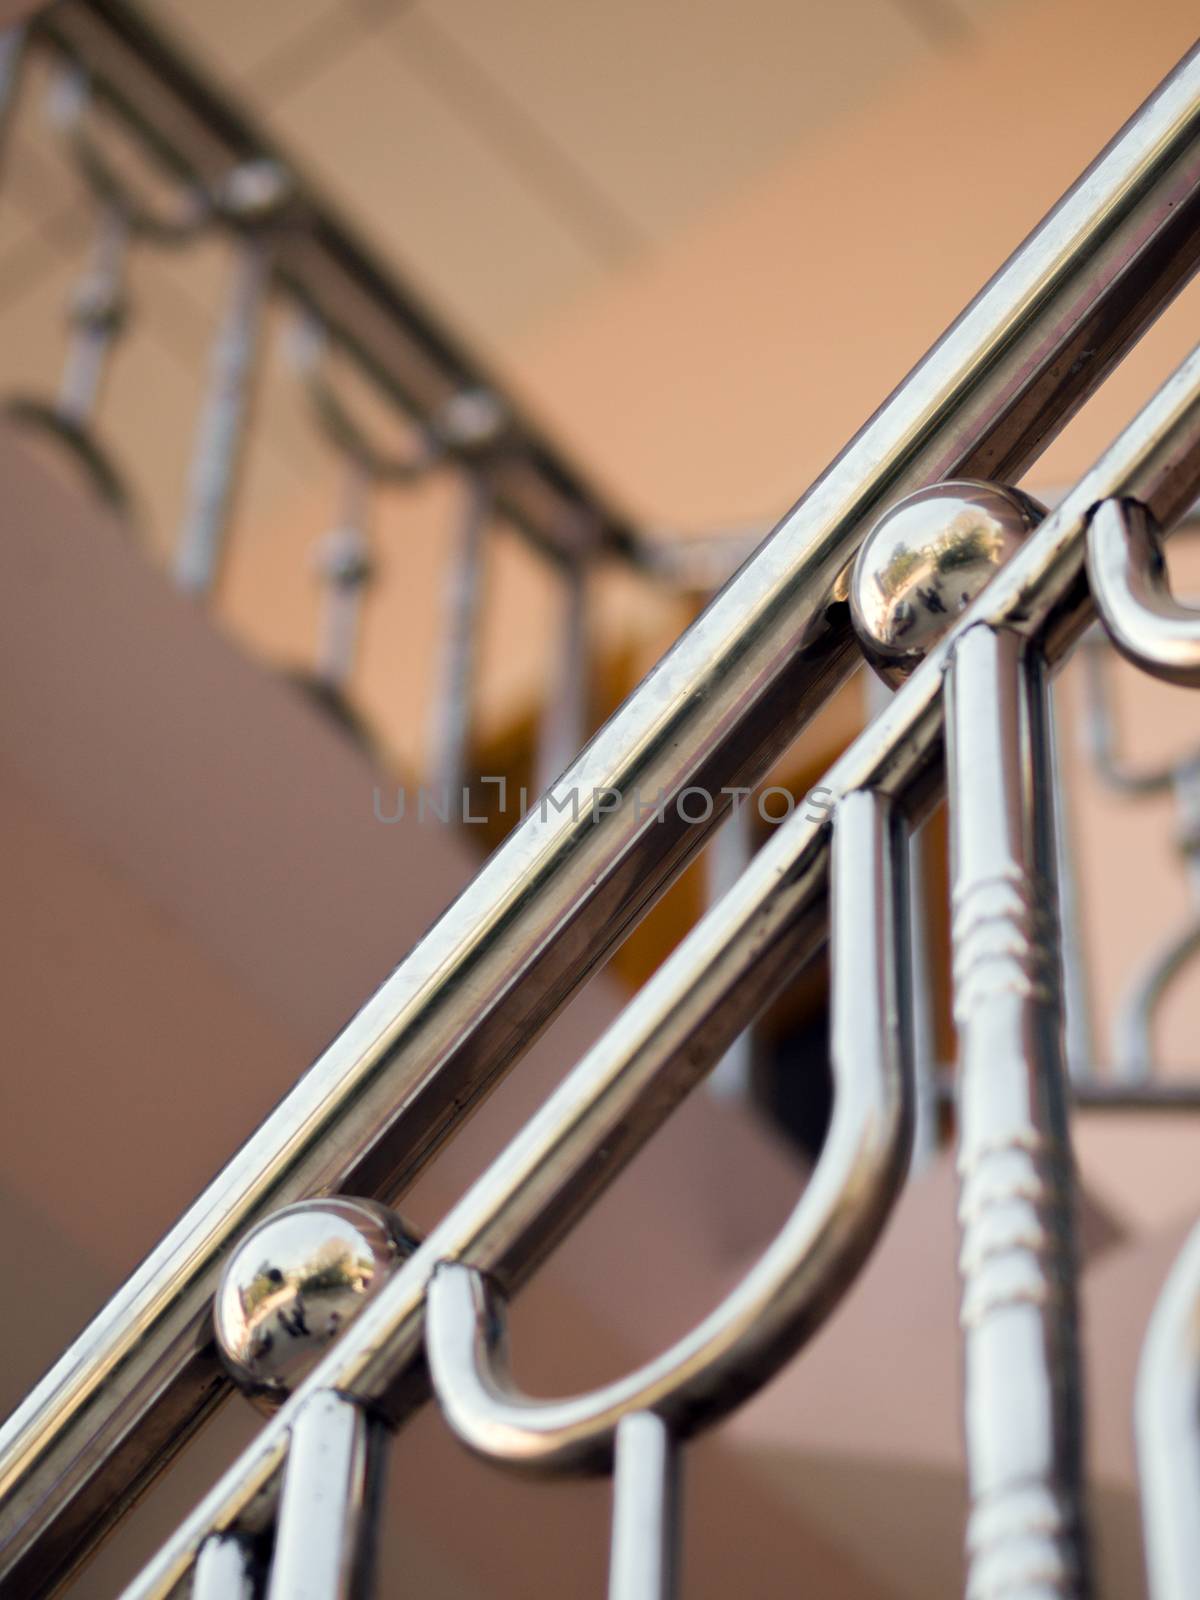 HANDRAIL MADE FROM STAINLESS STEEL by PrettyTG